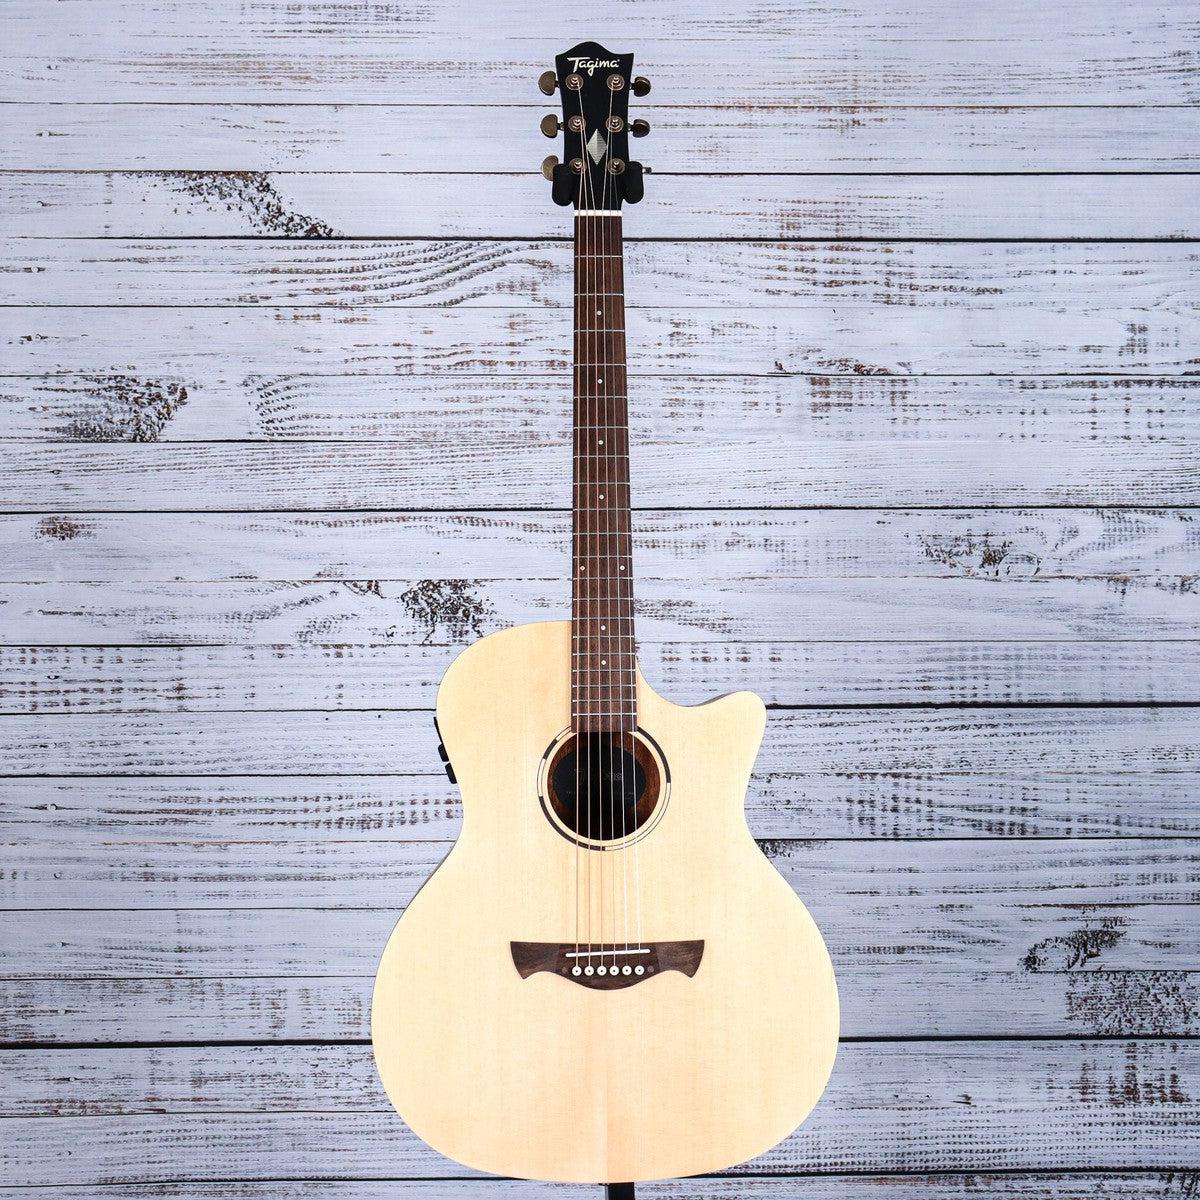 Tagima Frontier Acoustic/Electric Guitar